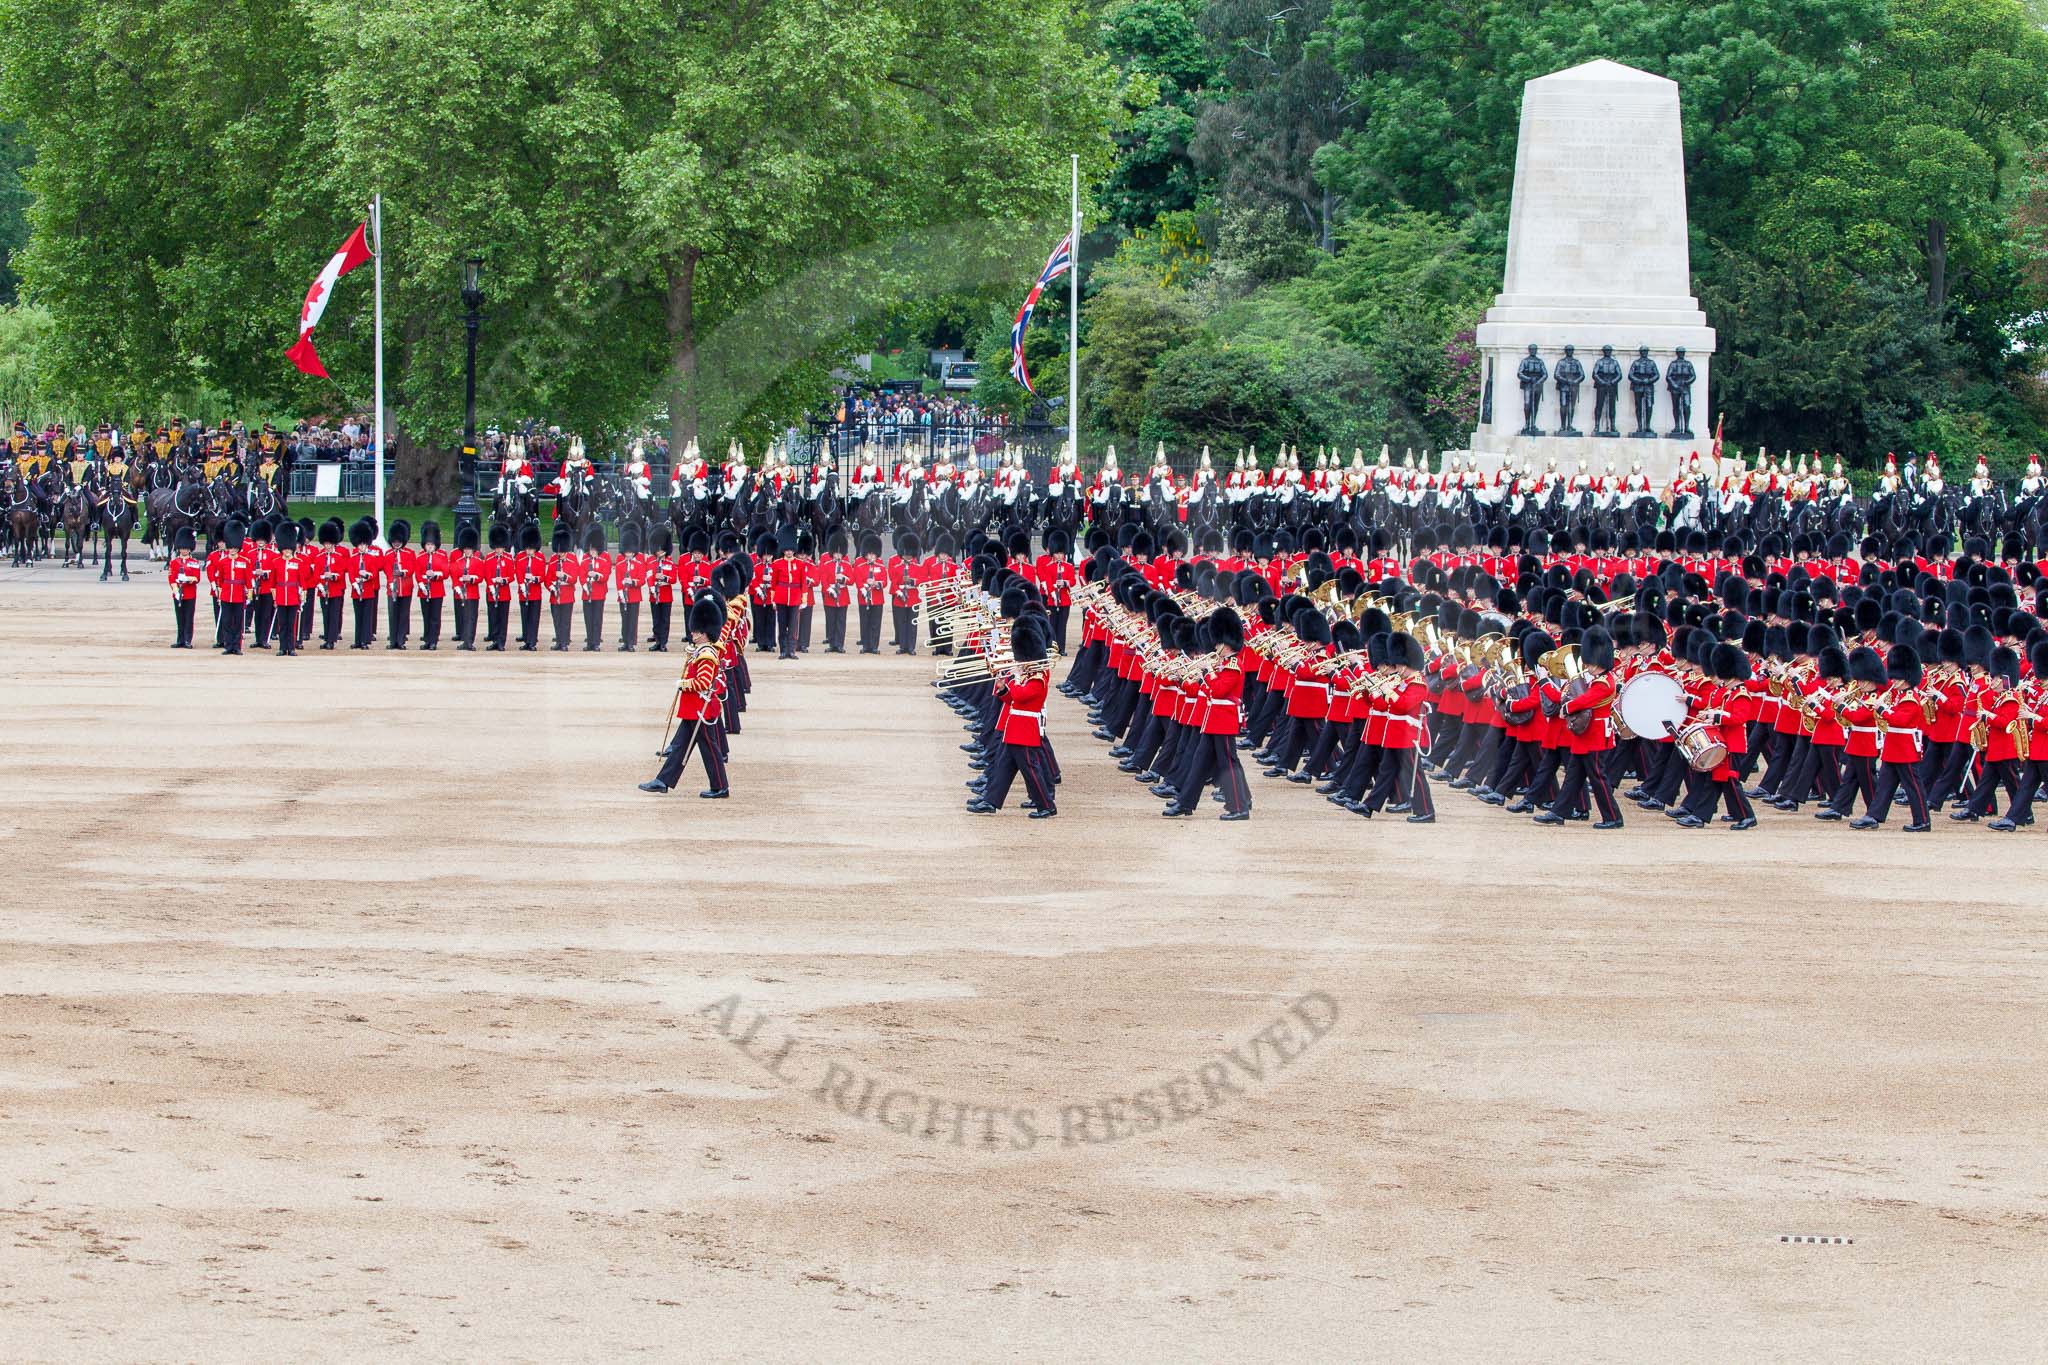 Major General's Review 2013: The five Drum Majors leading the Massed Bands as they are playing the Grenadiers Slow March..
Horse Guards Parade, Westminster,
London SW1,

United Kingdom,
on 01 June 2013 at 11:23, image #422